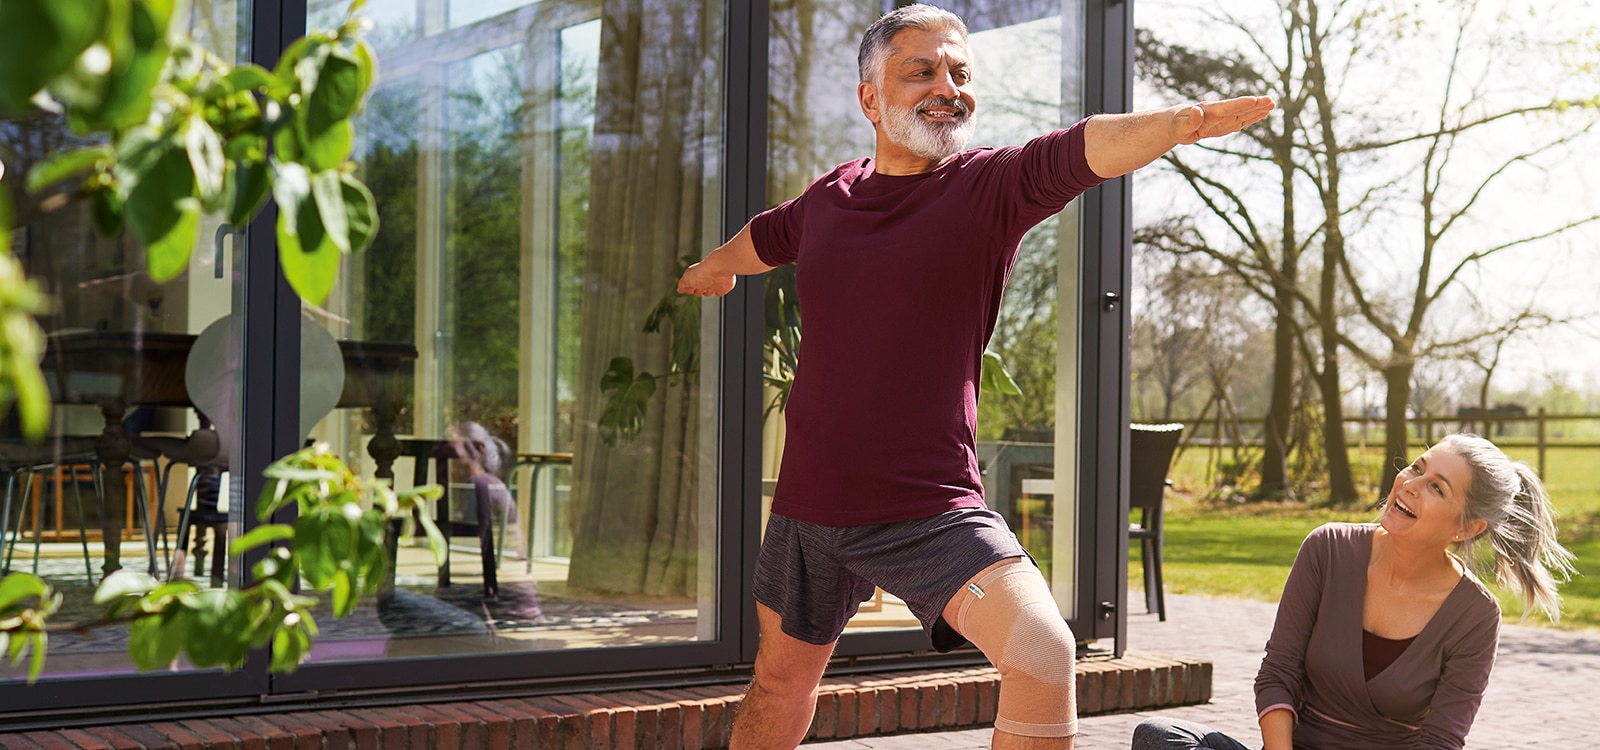 Smiling man wearing sports clothes and a knee support does stretch exercises outside as a woman looks on 